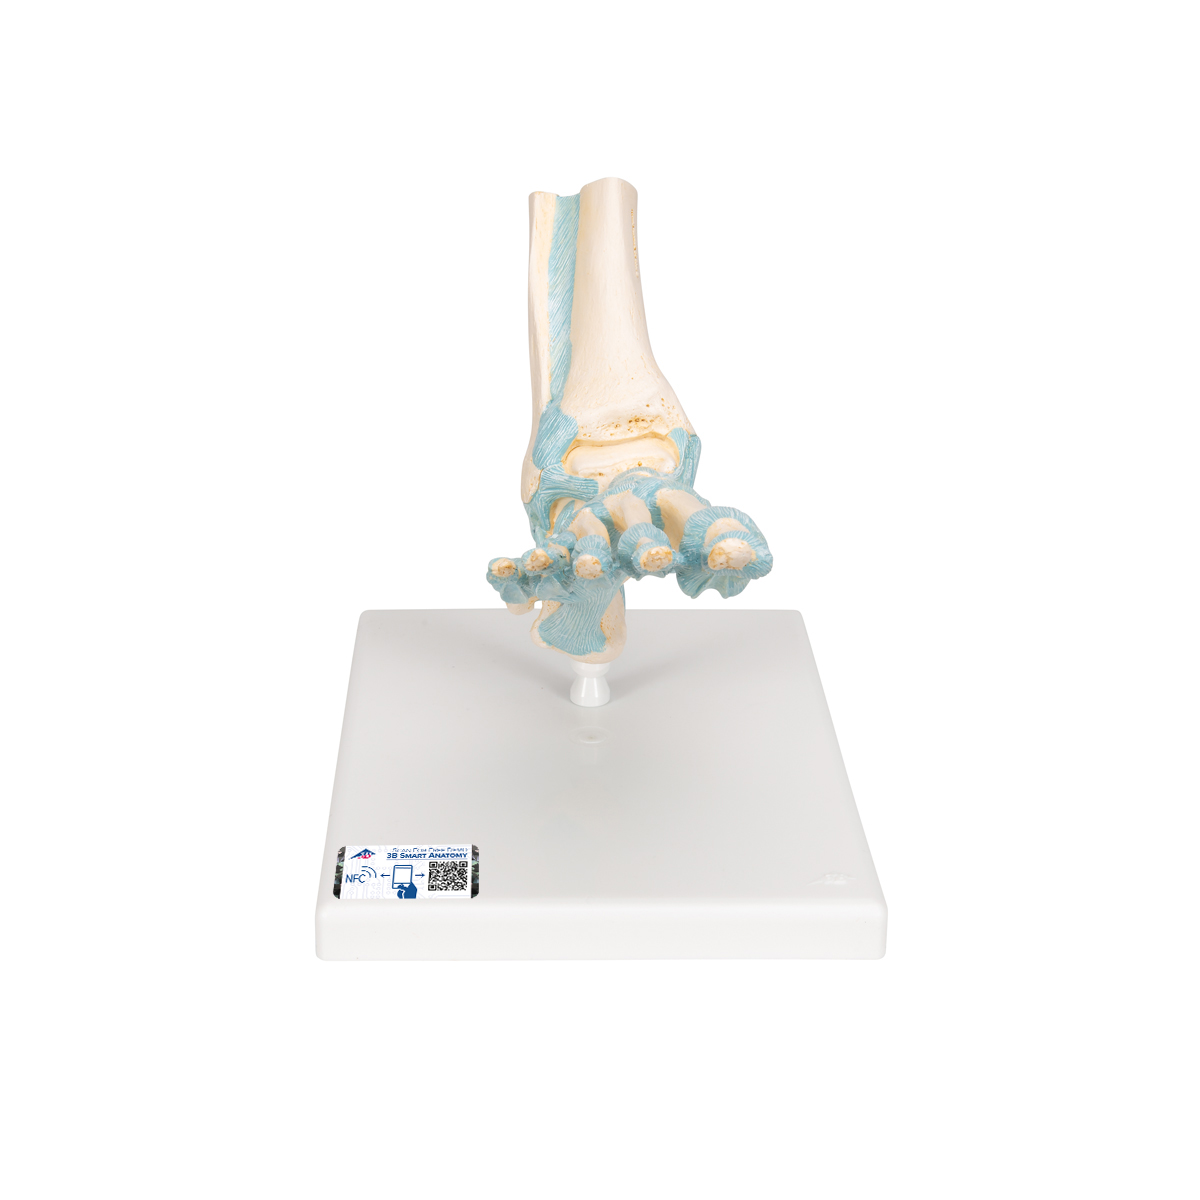 Hand Joint Model with Standing Base for Medical School Teaching Aids Decoration Anatomical Educational Model,Medical Models Educational Model LifeSize Human Skeleton Foot Ankle Joint 